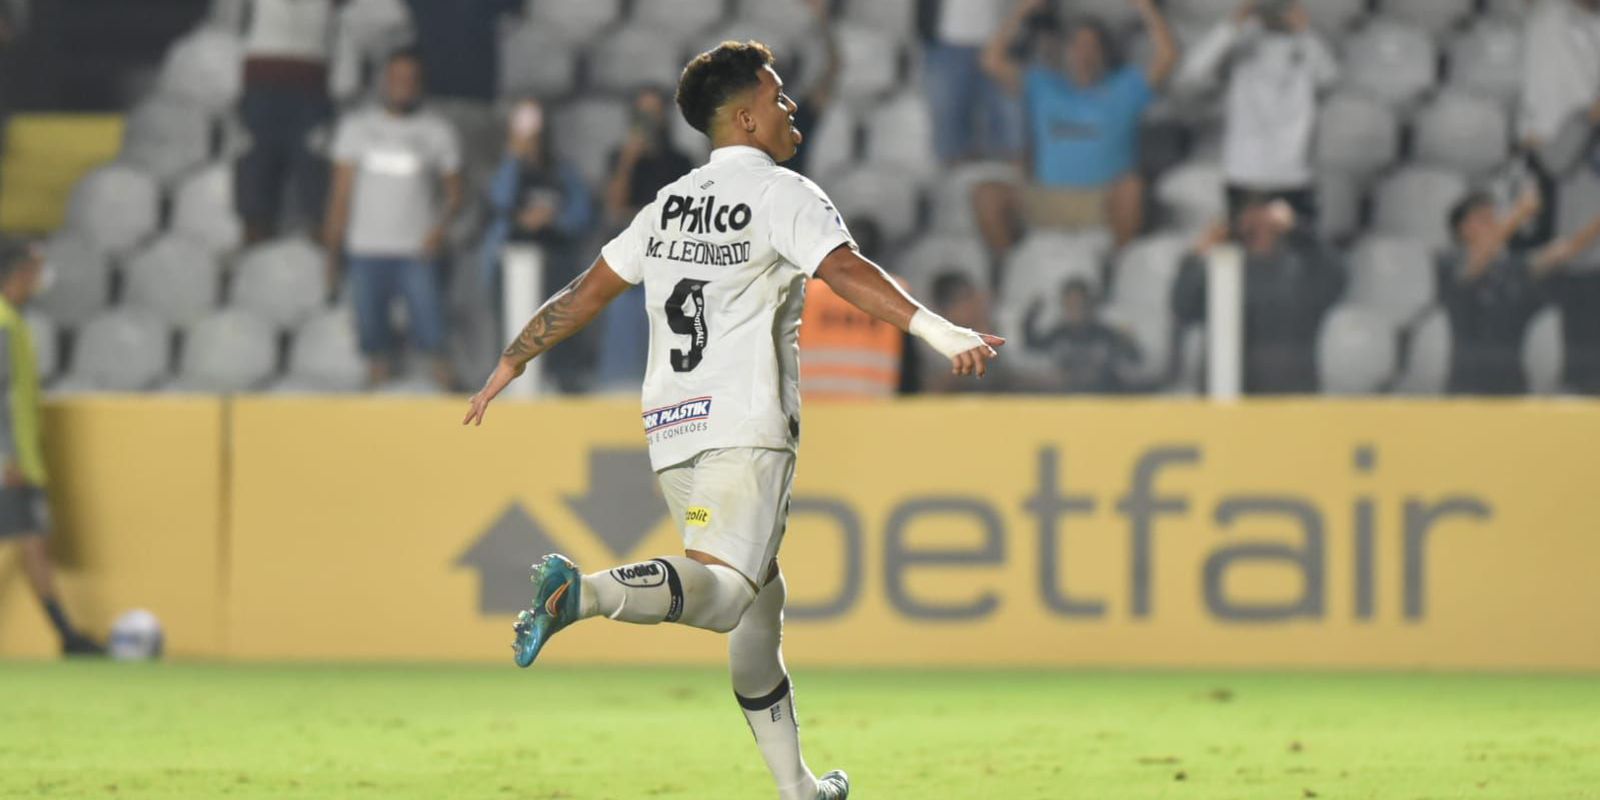 Santos is guaranteed to reach the round of 16 of the Copa Sudamericana